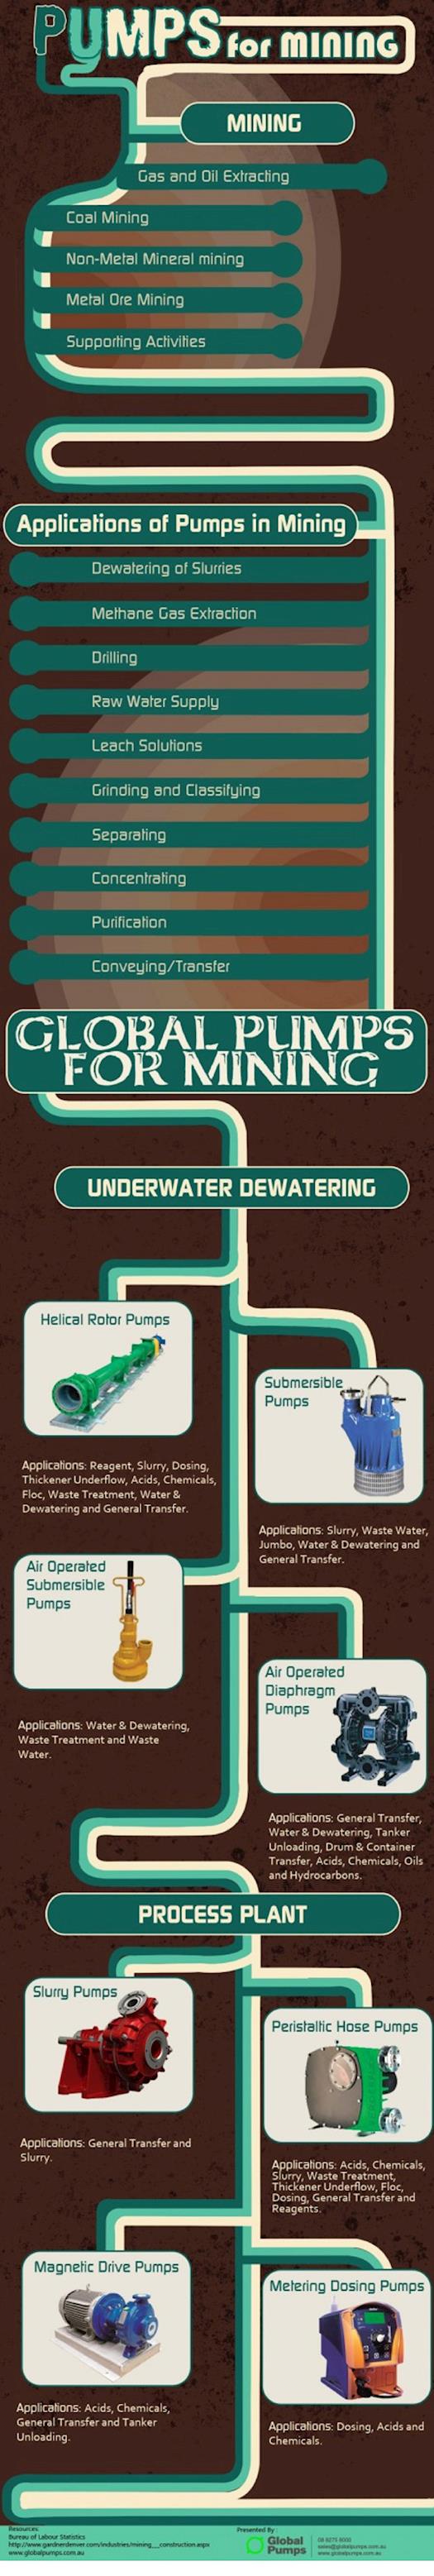 Pumps for Mining by Global Pumps (Infographic)